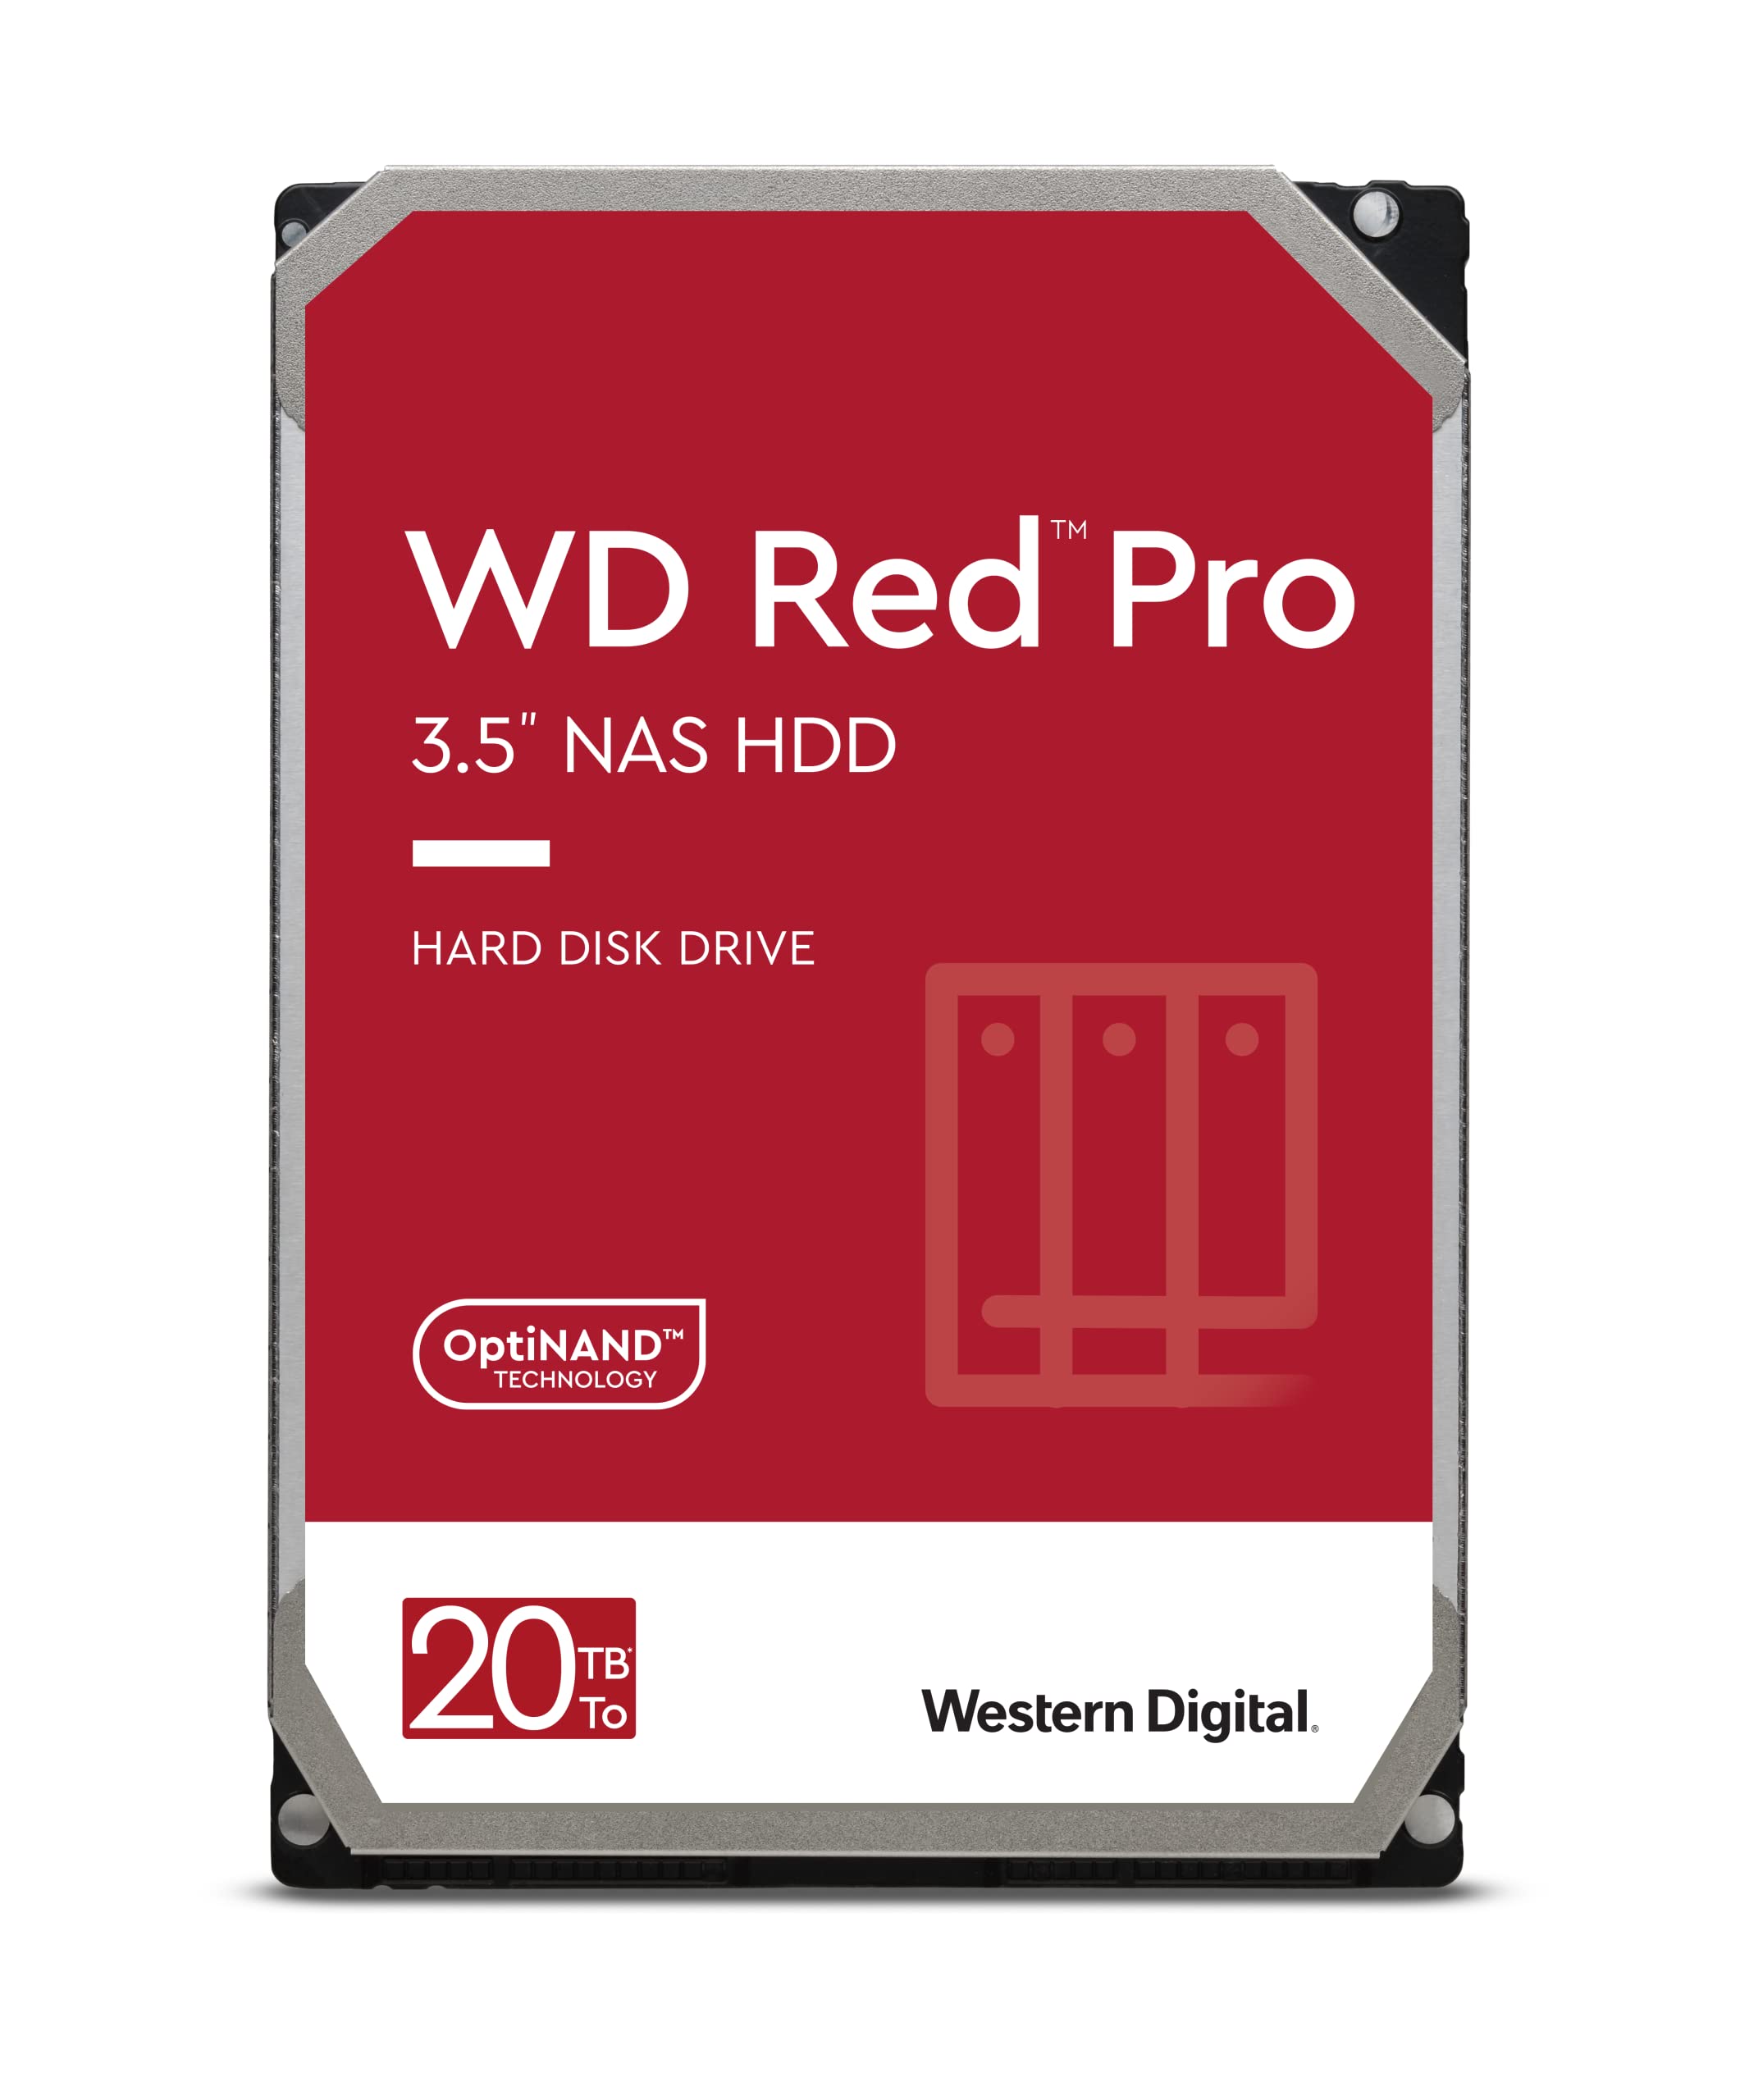 2 x 20TB WD Red™ Pro NAS Hard Drive for $749.98 + Free Shipping